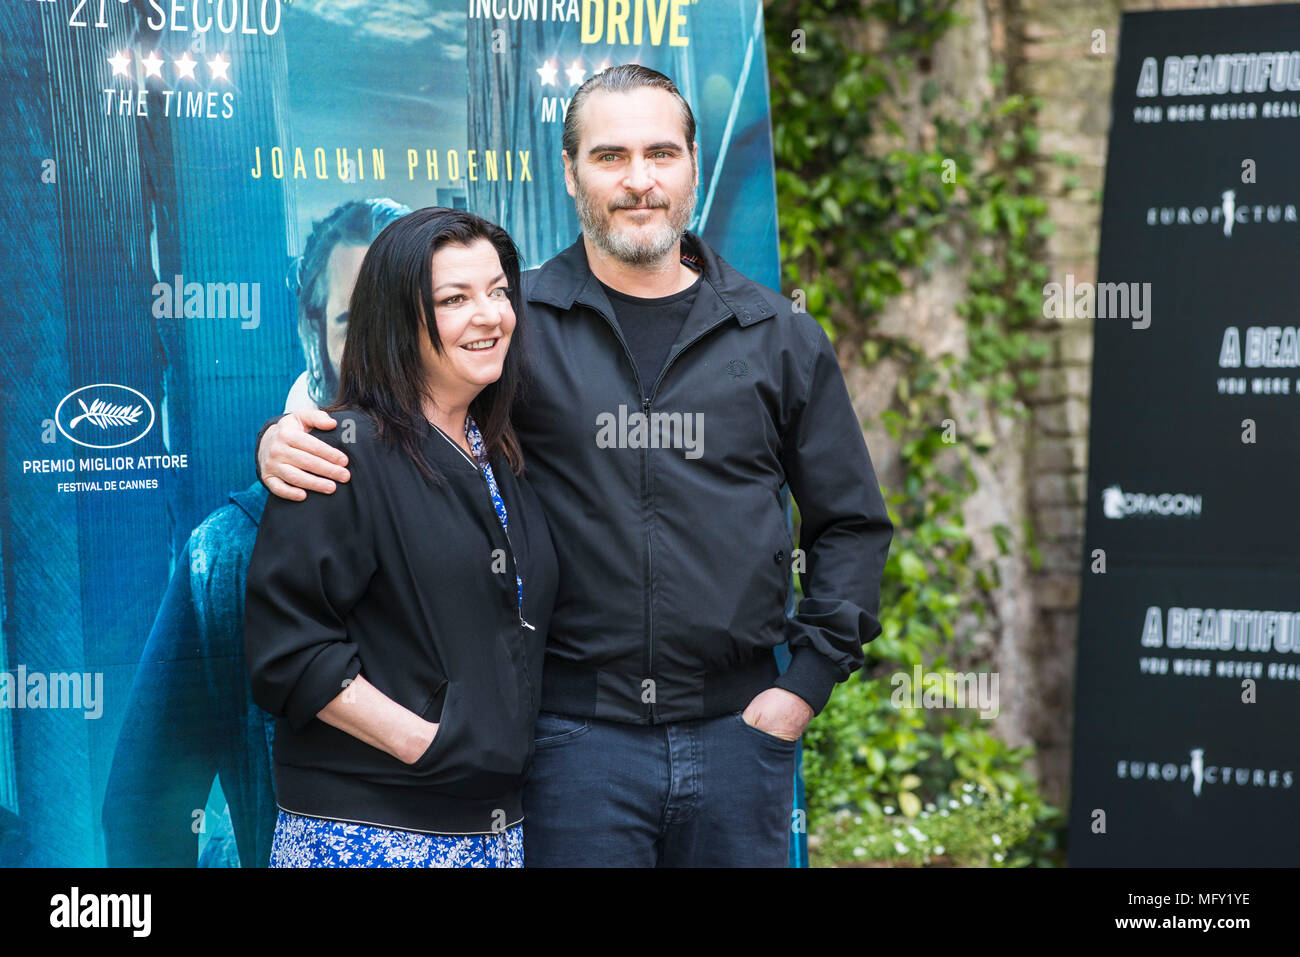 Rome, Italy. 27th Apr, 2018. Joaquin Phoenix and Lynne Ramsay attending the photocall of A Beautiful Day - You Were Never Really Here at Hotel De Russie in Rome. Credit: Silvia Gerbino/Alamy Live News Stock Photo